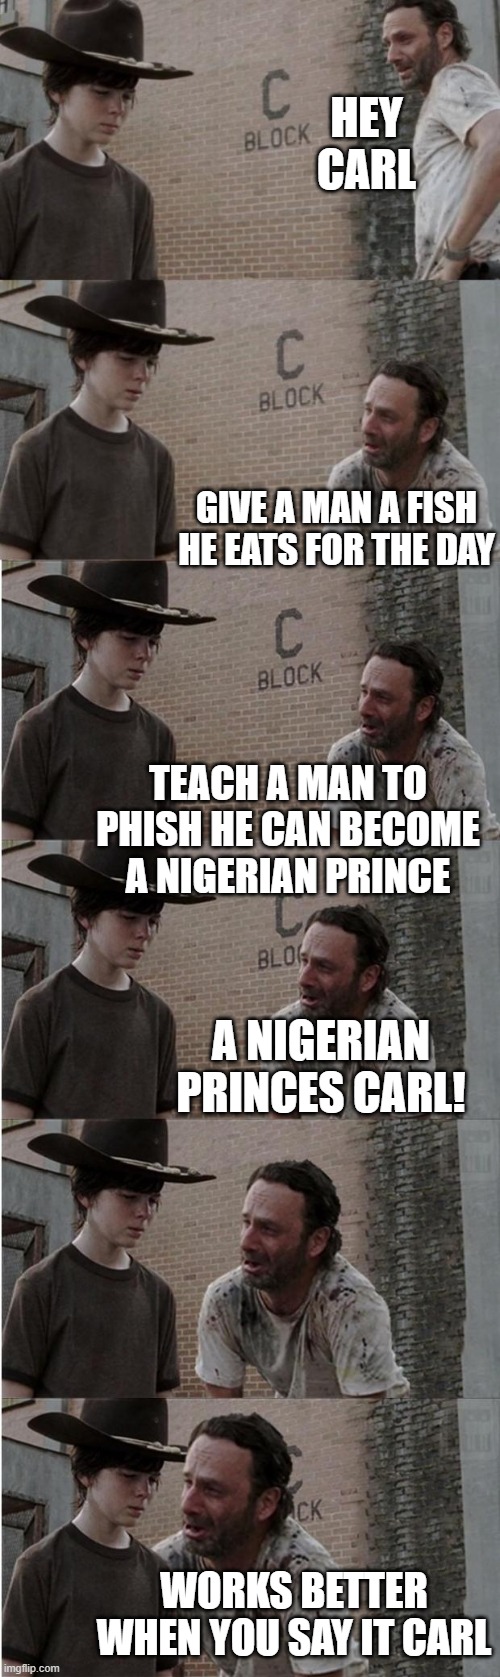 Rick and Carl Longer Meme | HEY CARL GIVE A MAN A FISH HE EATS FOR THE DAY TEACH A MAN TO PHISH HE CAN BECOME A NIGERIAN PRINCE A NIGERIAN PRINCES CARL! WORKS BETTER WH | image tagged in memes,rick and carl longer | made w/ Imgflip meme maker